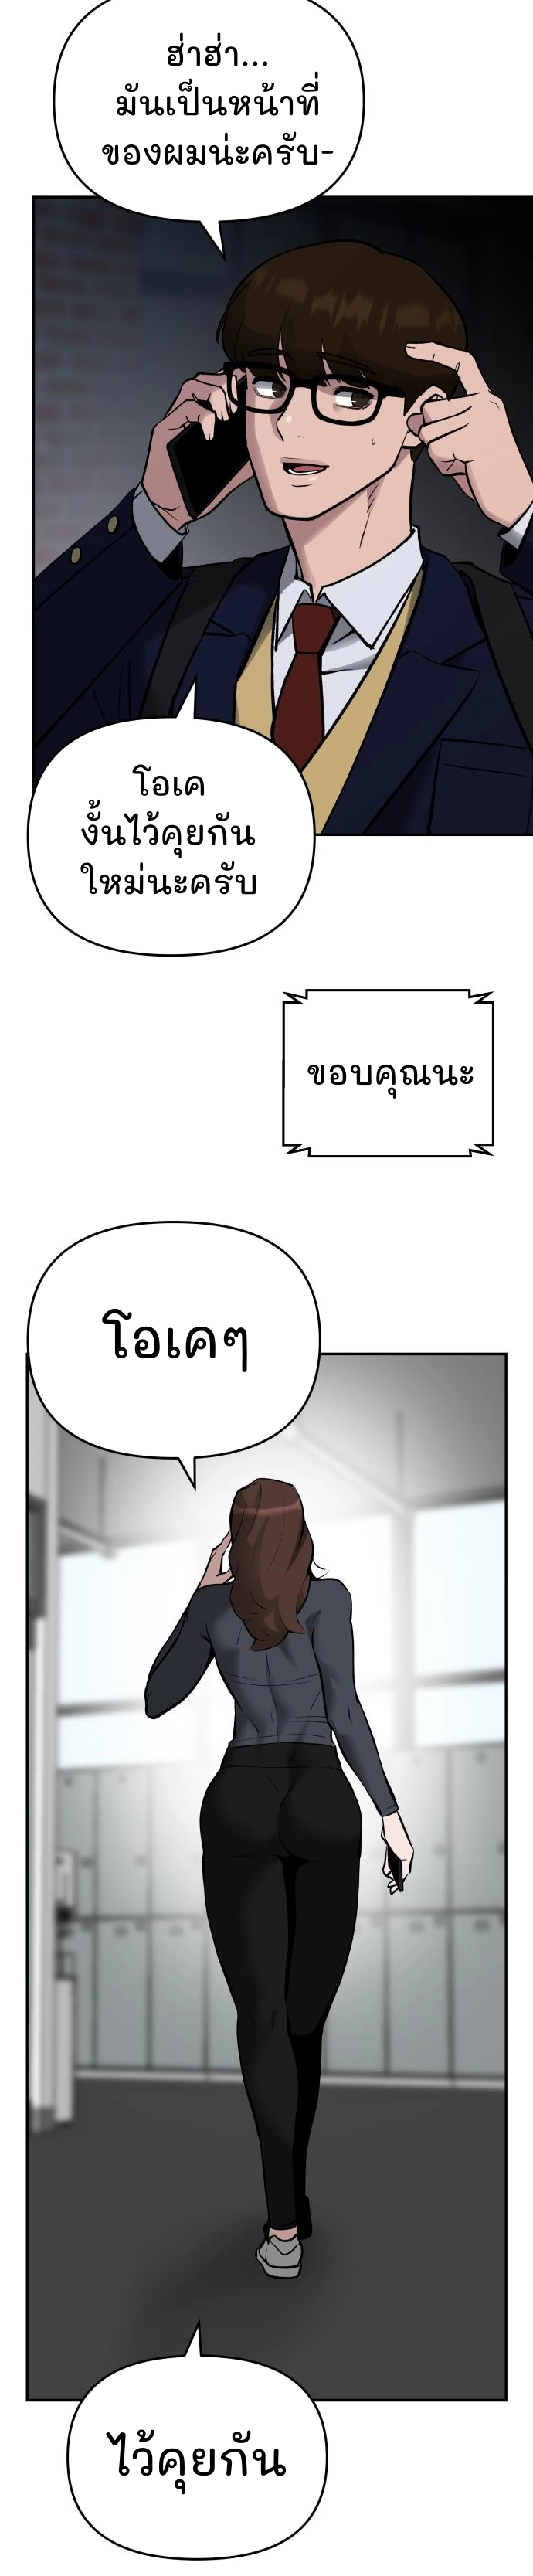 The Bully In-Charge ตอนที่ 47